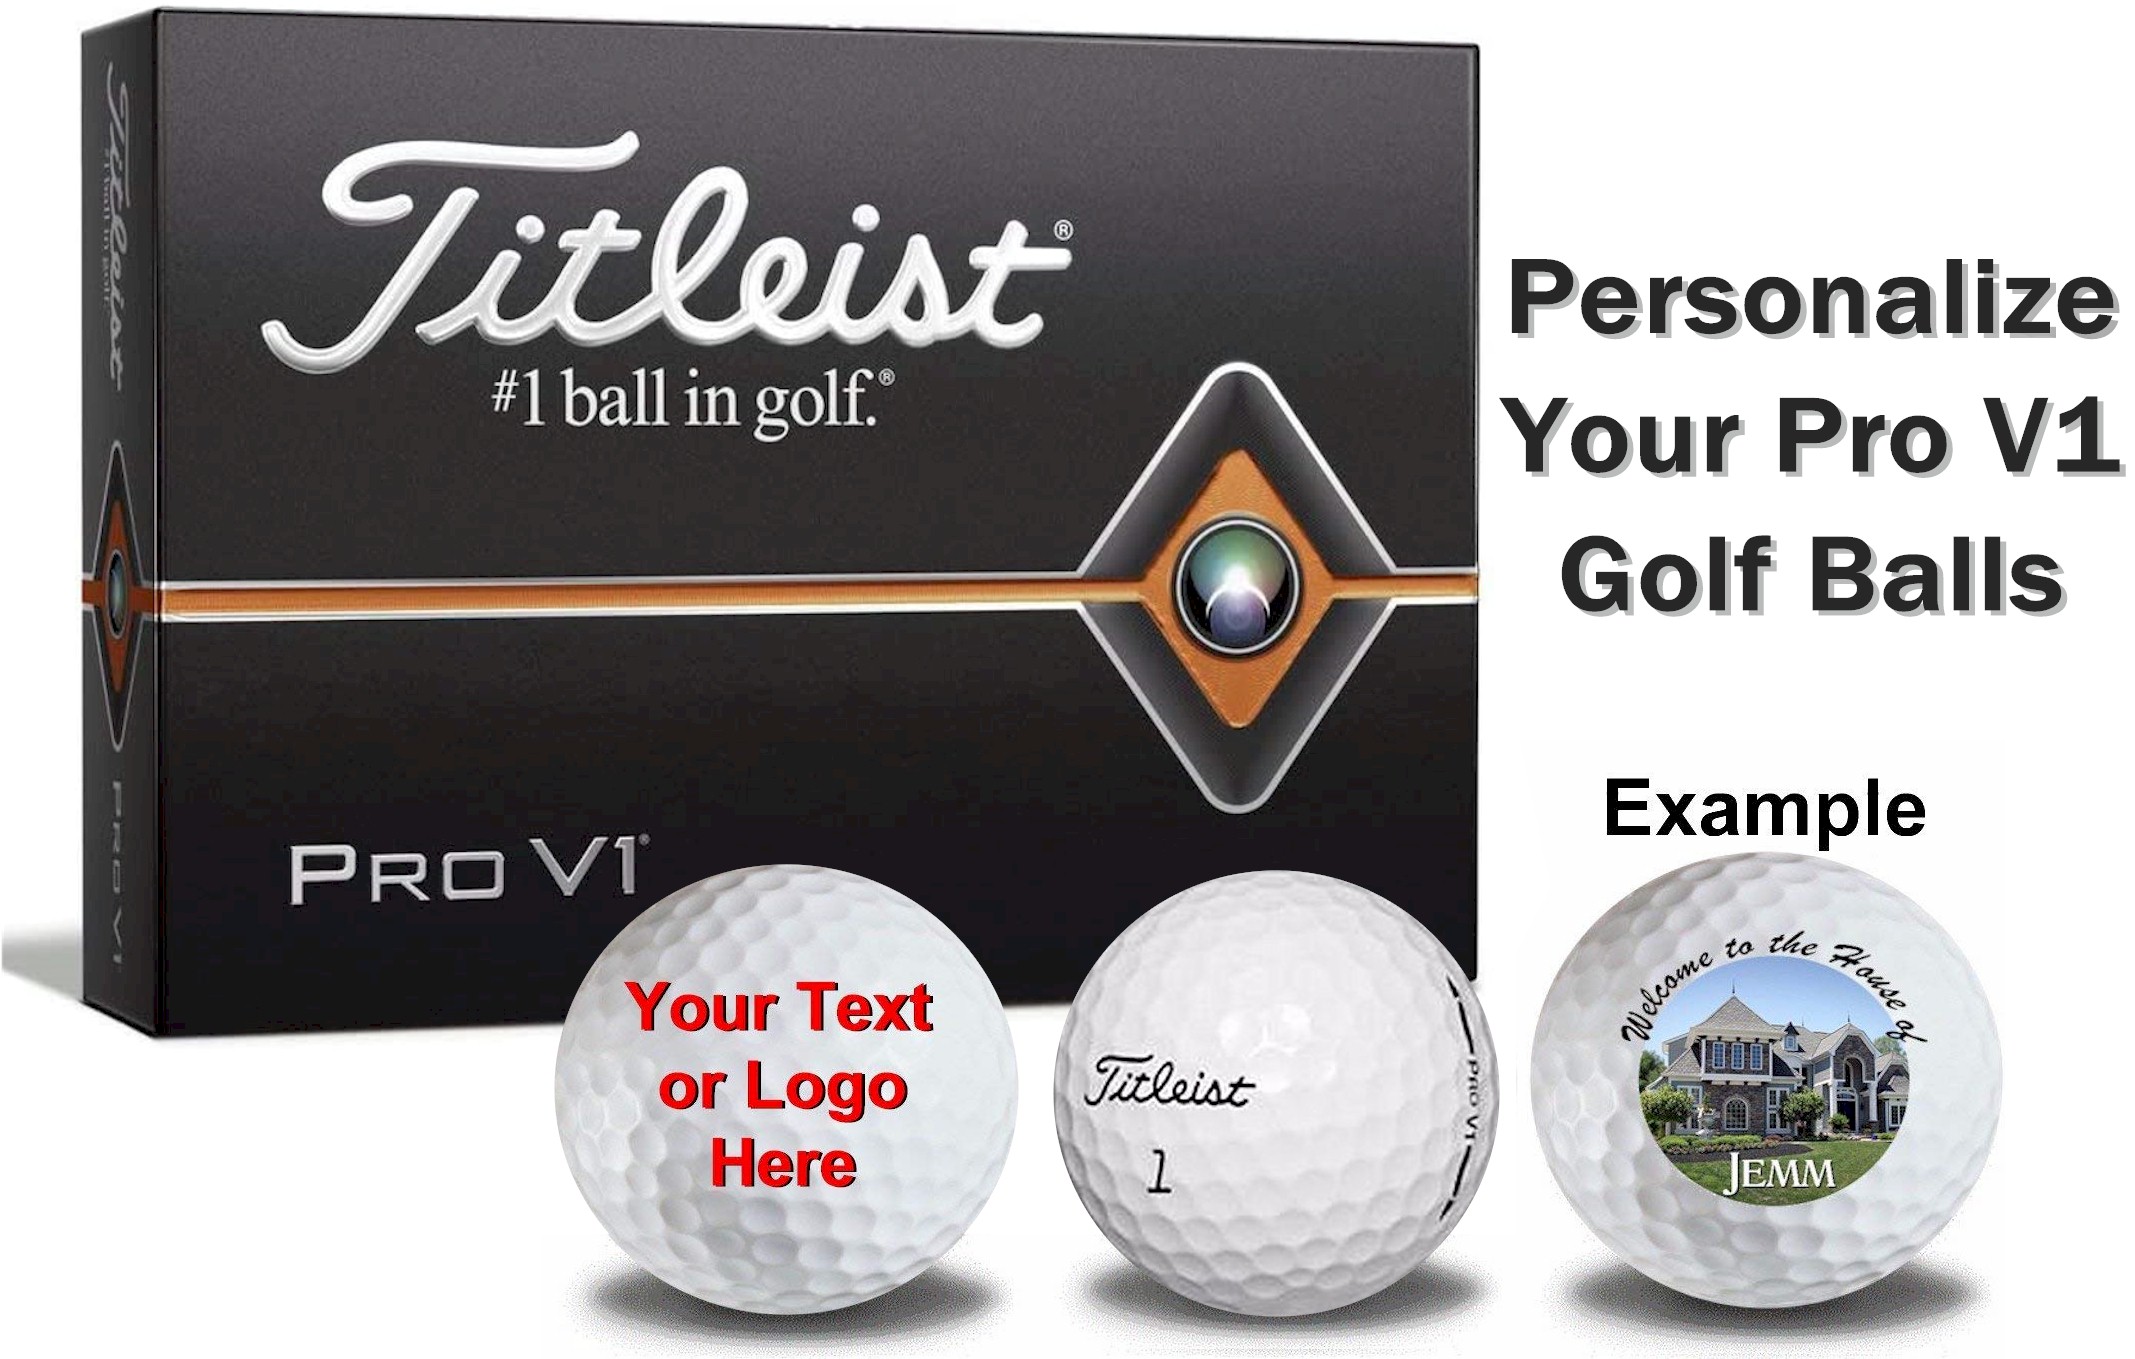 Personalized golf balls dick's